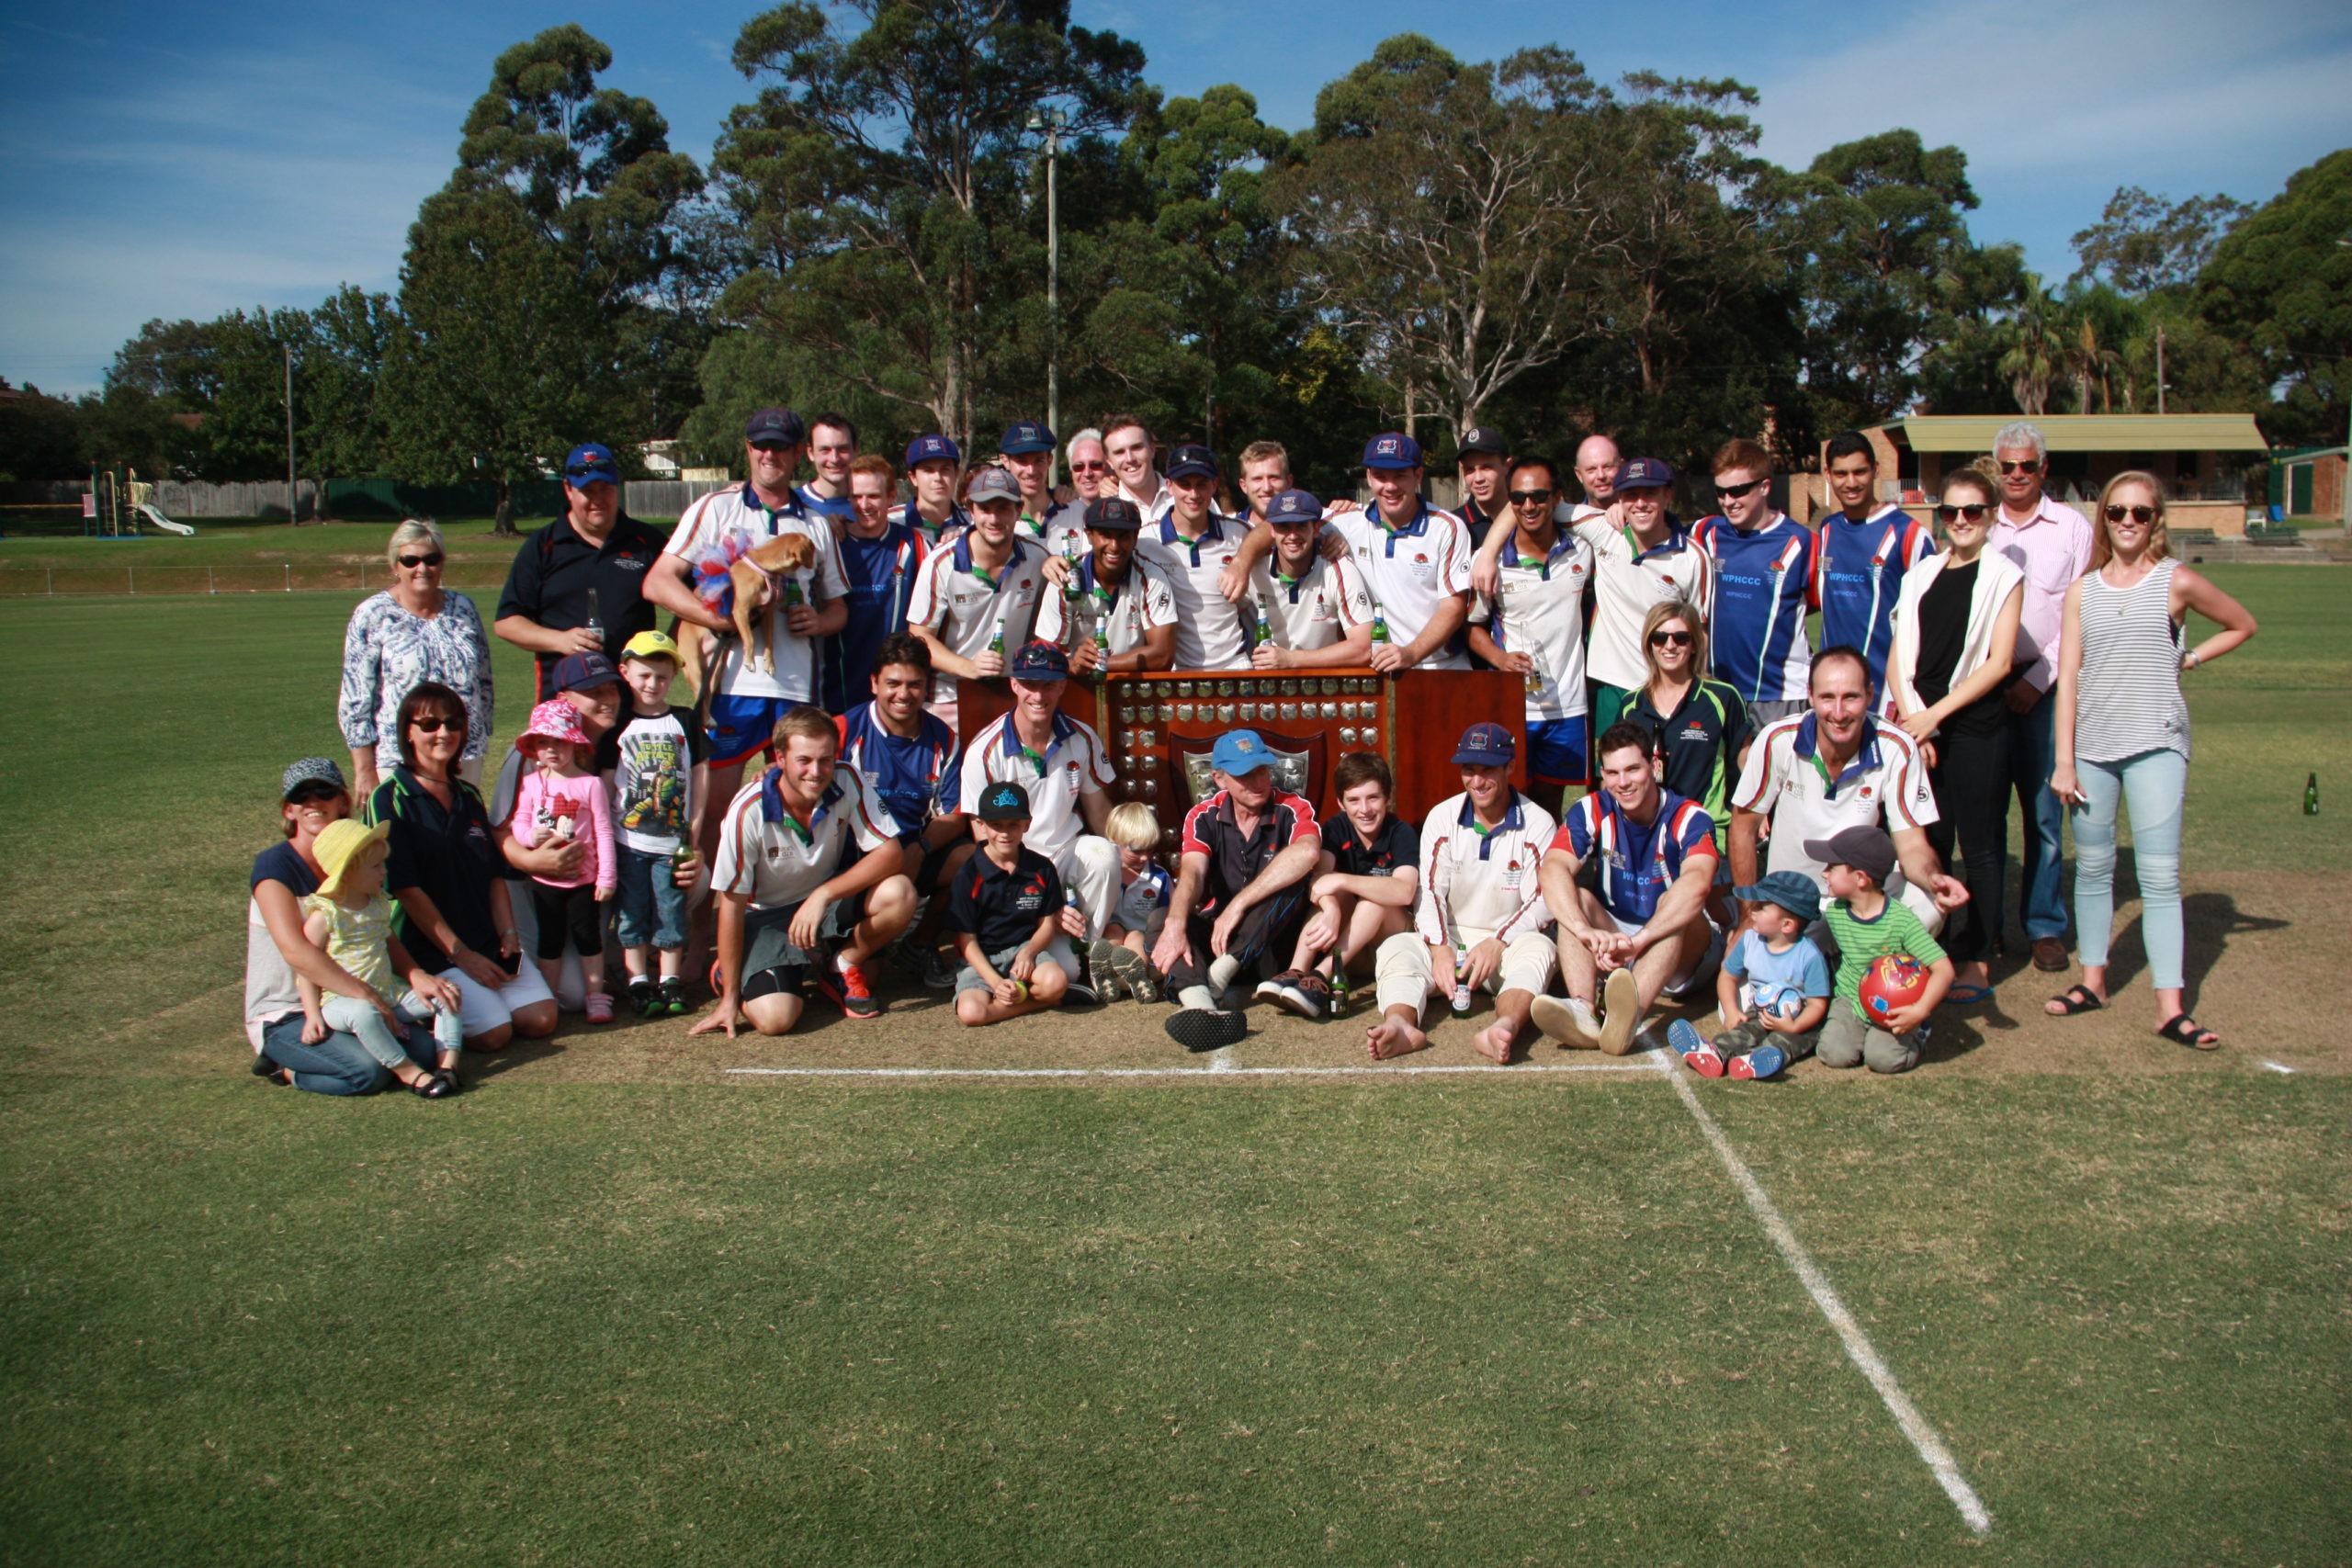 A1 (Rofie 4) and A2 Premiers and friends at Asquith Oval 28th and 29th March 2015.